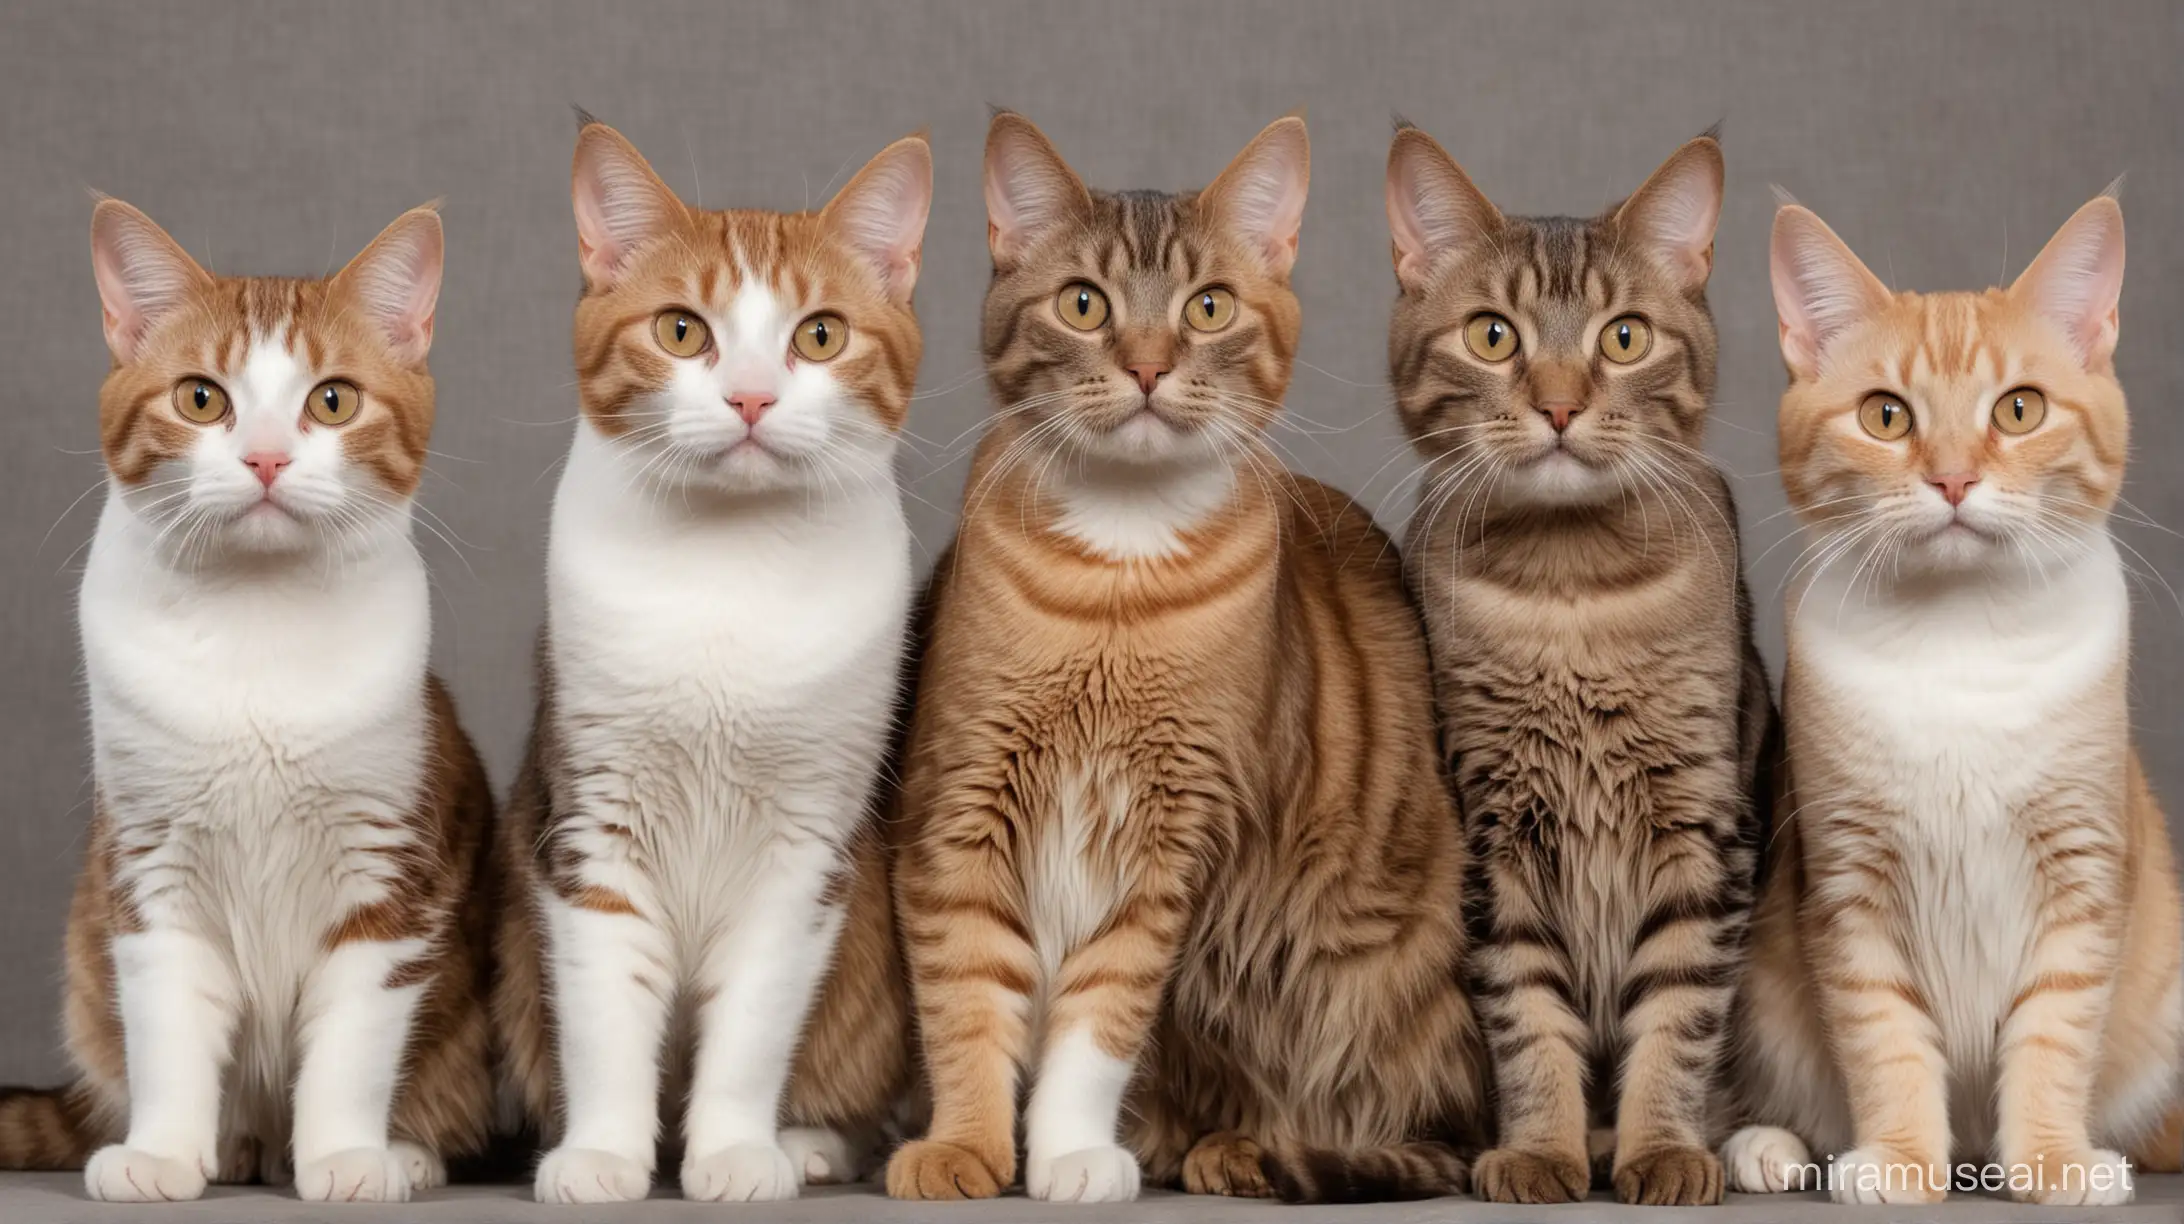 Five Playful Brown Cat Breeds American Wirehair Bengal Burmese Maine Coon and Munchkin